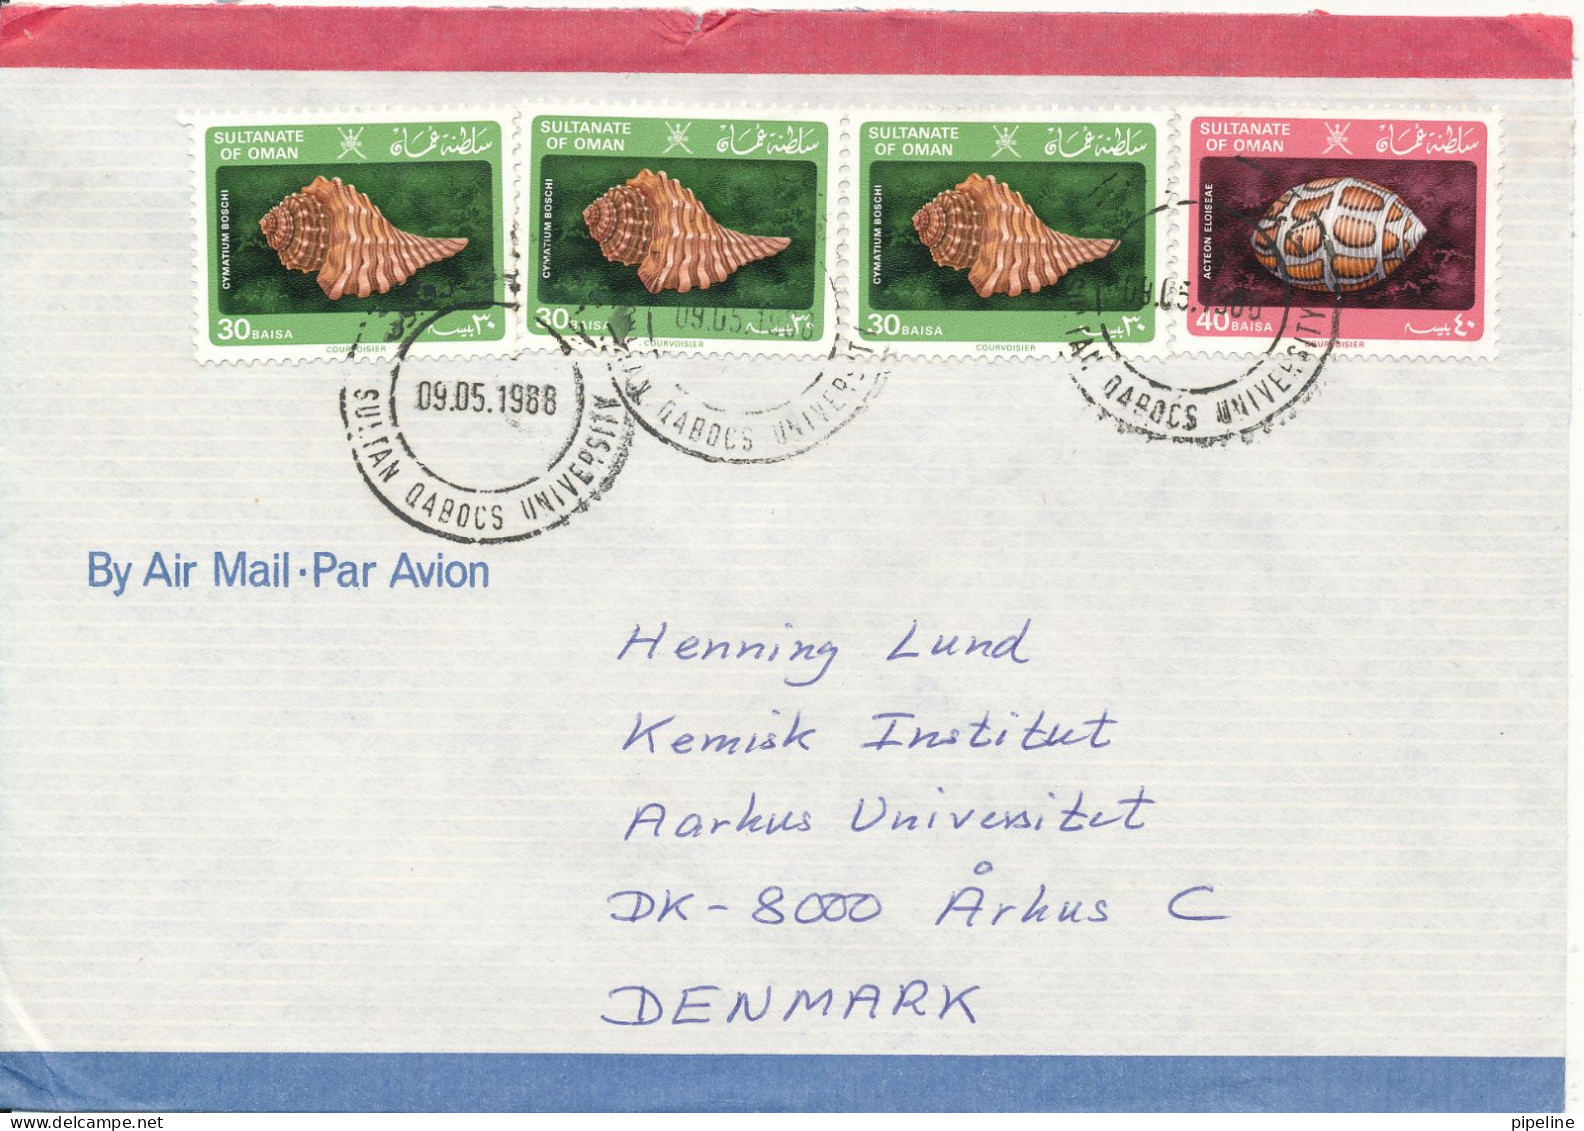 Oman Air Mail Cover Sent To Denmark 9-5-1988 Topic Stamps - Oman